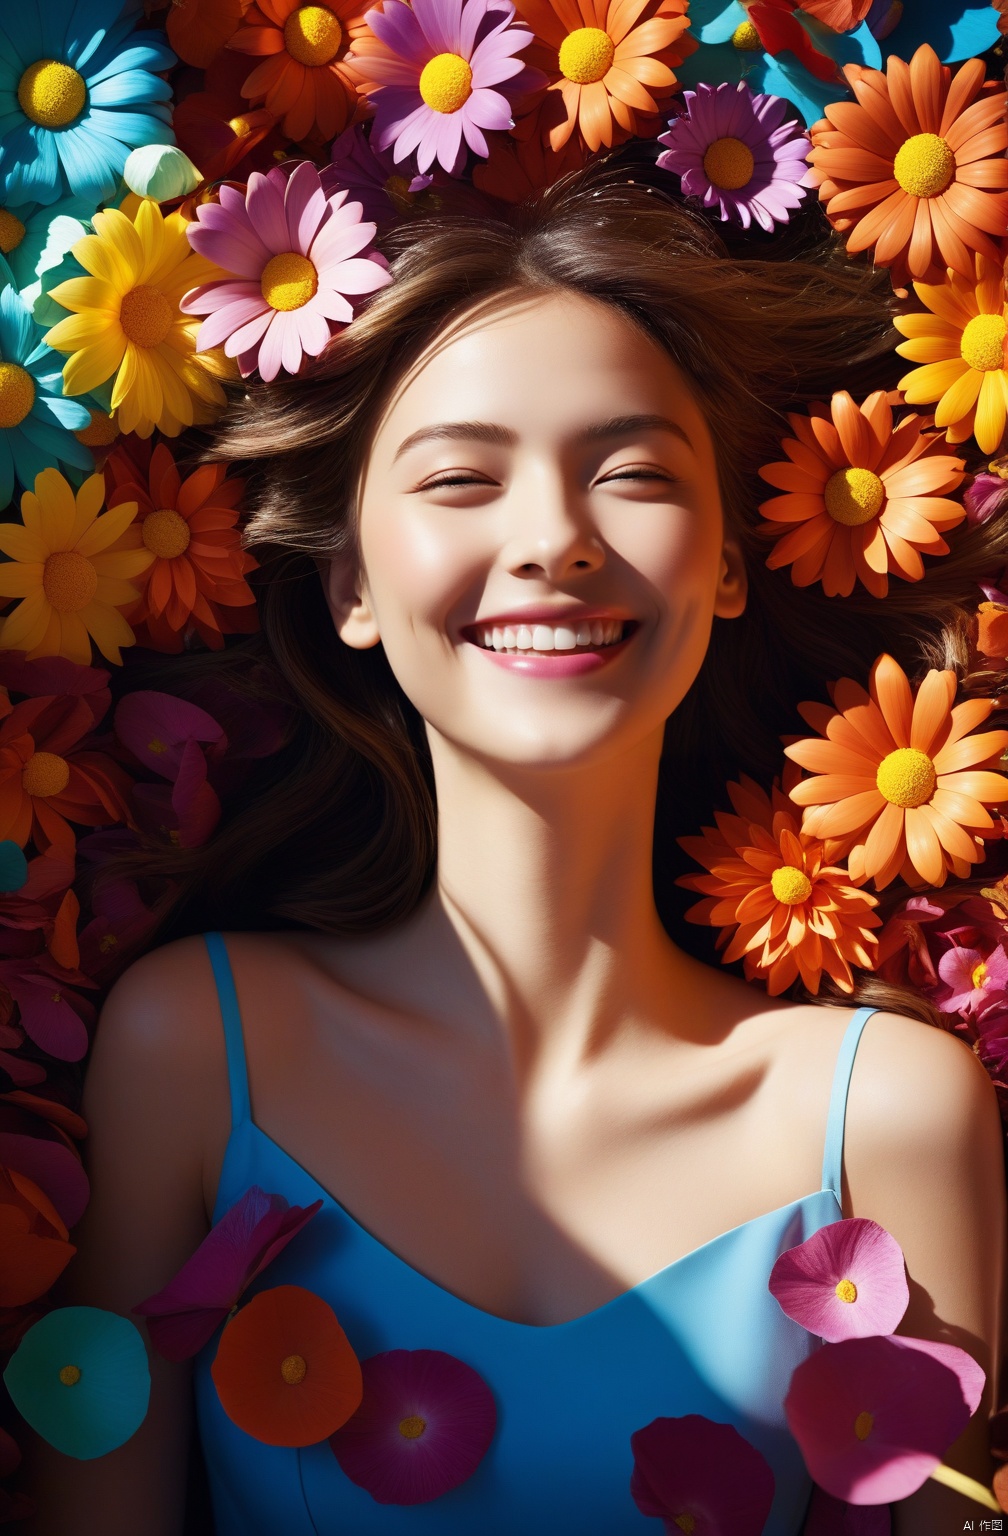  None, 1Girl, upper body, solo, smile, happiness, nostalgia, petals, surrealistic imagery, dreamy atmosphere, vibrant and contrasting colors, complex and detailed elements, cool light, deep shadows